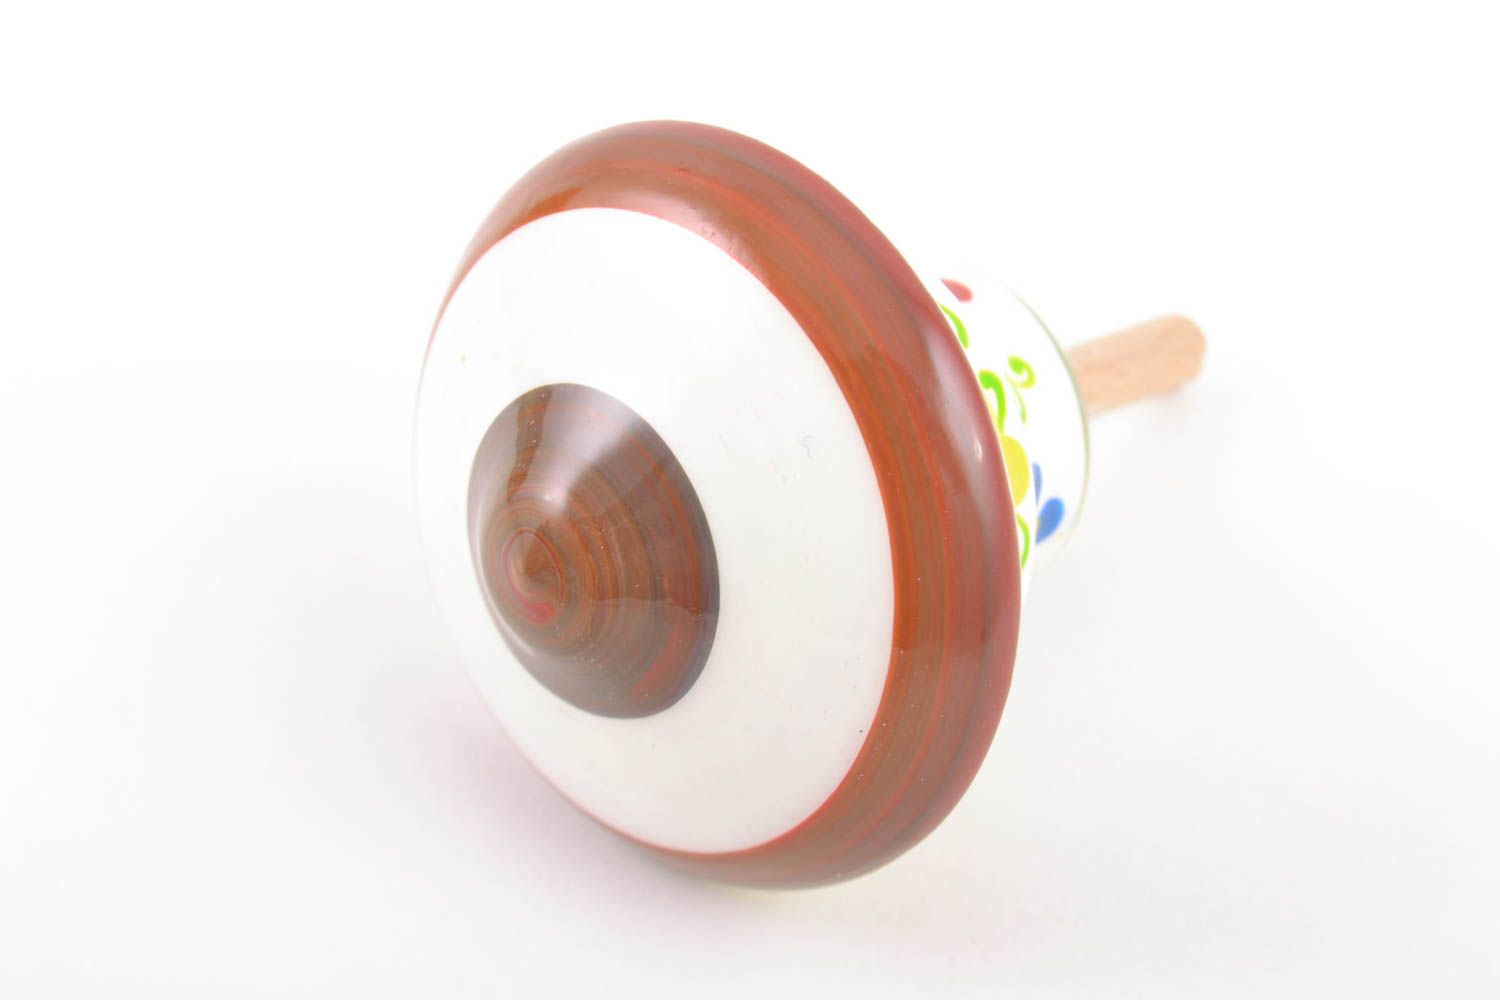 Small bright painted handmade wooden education toy spinning top for children photo 4